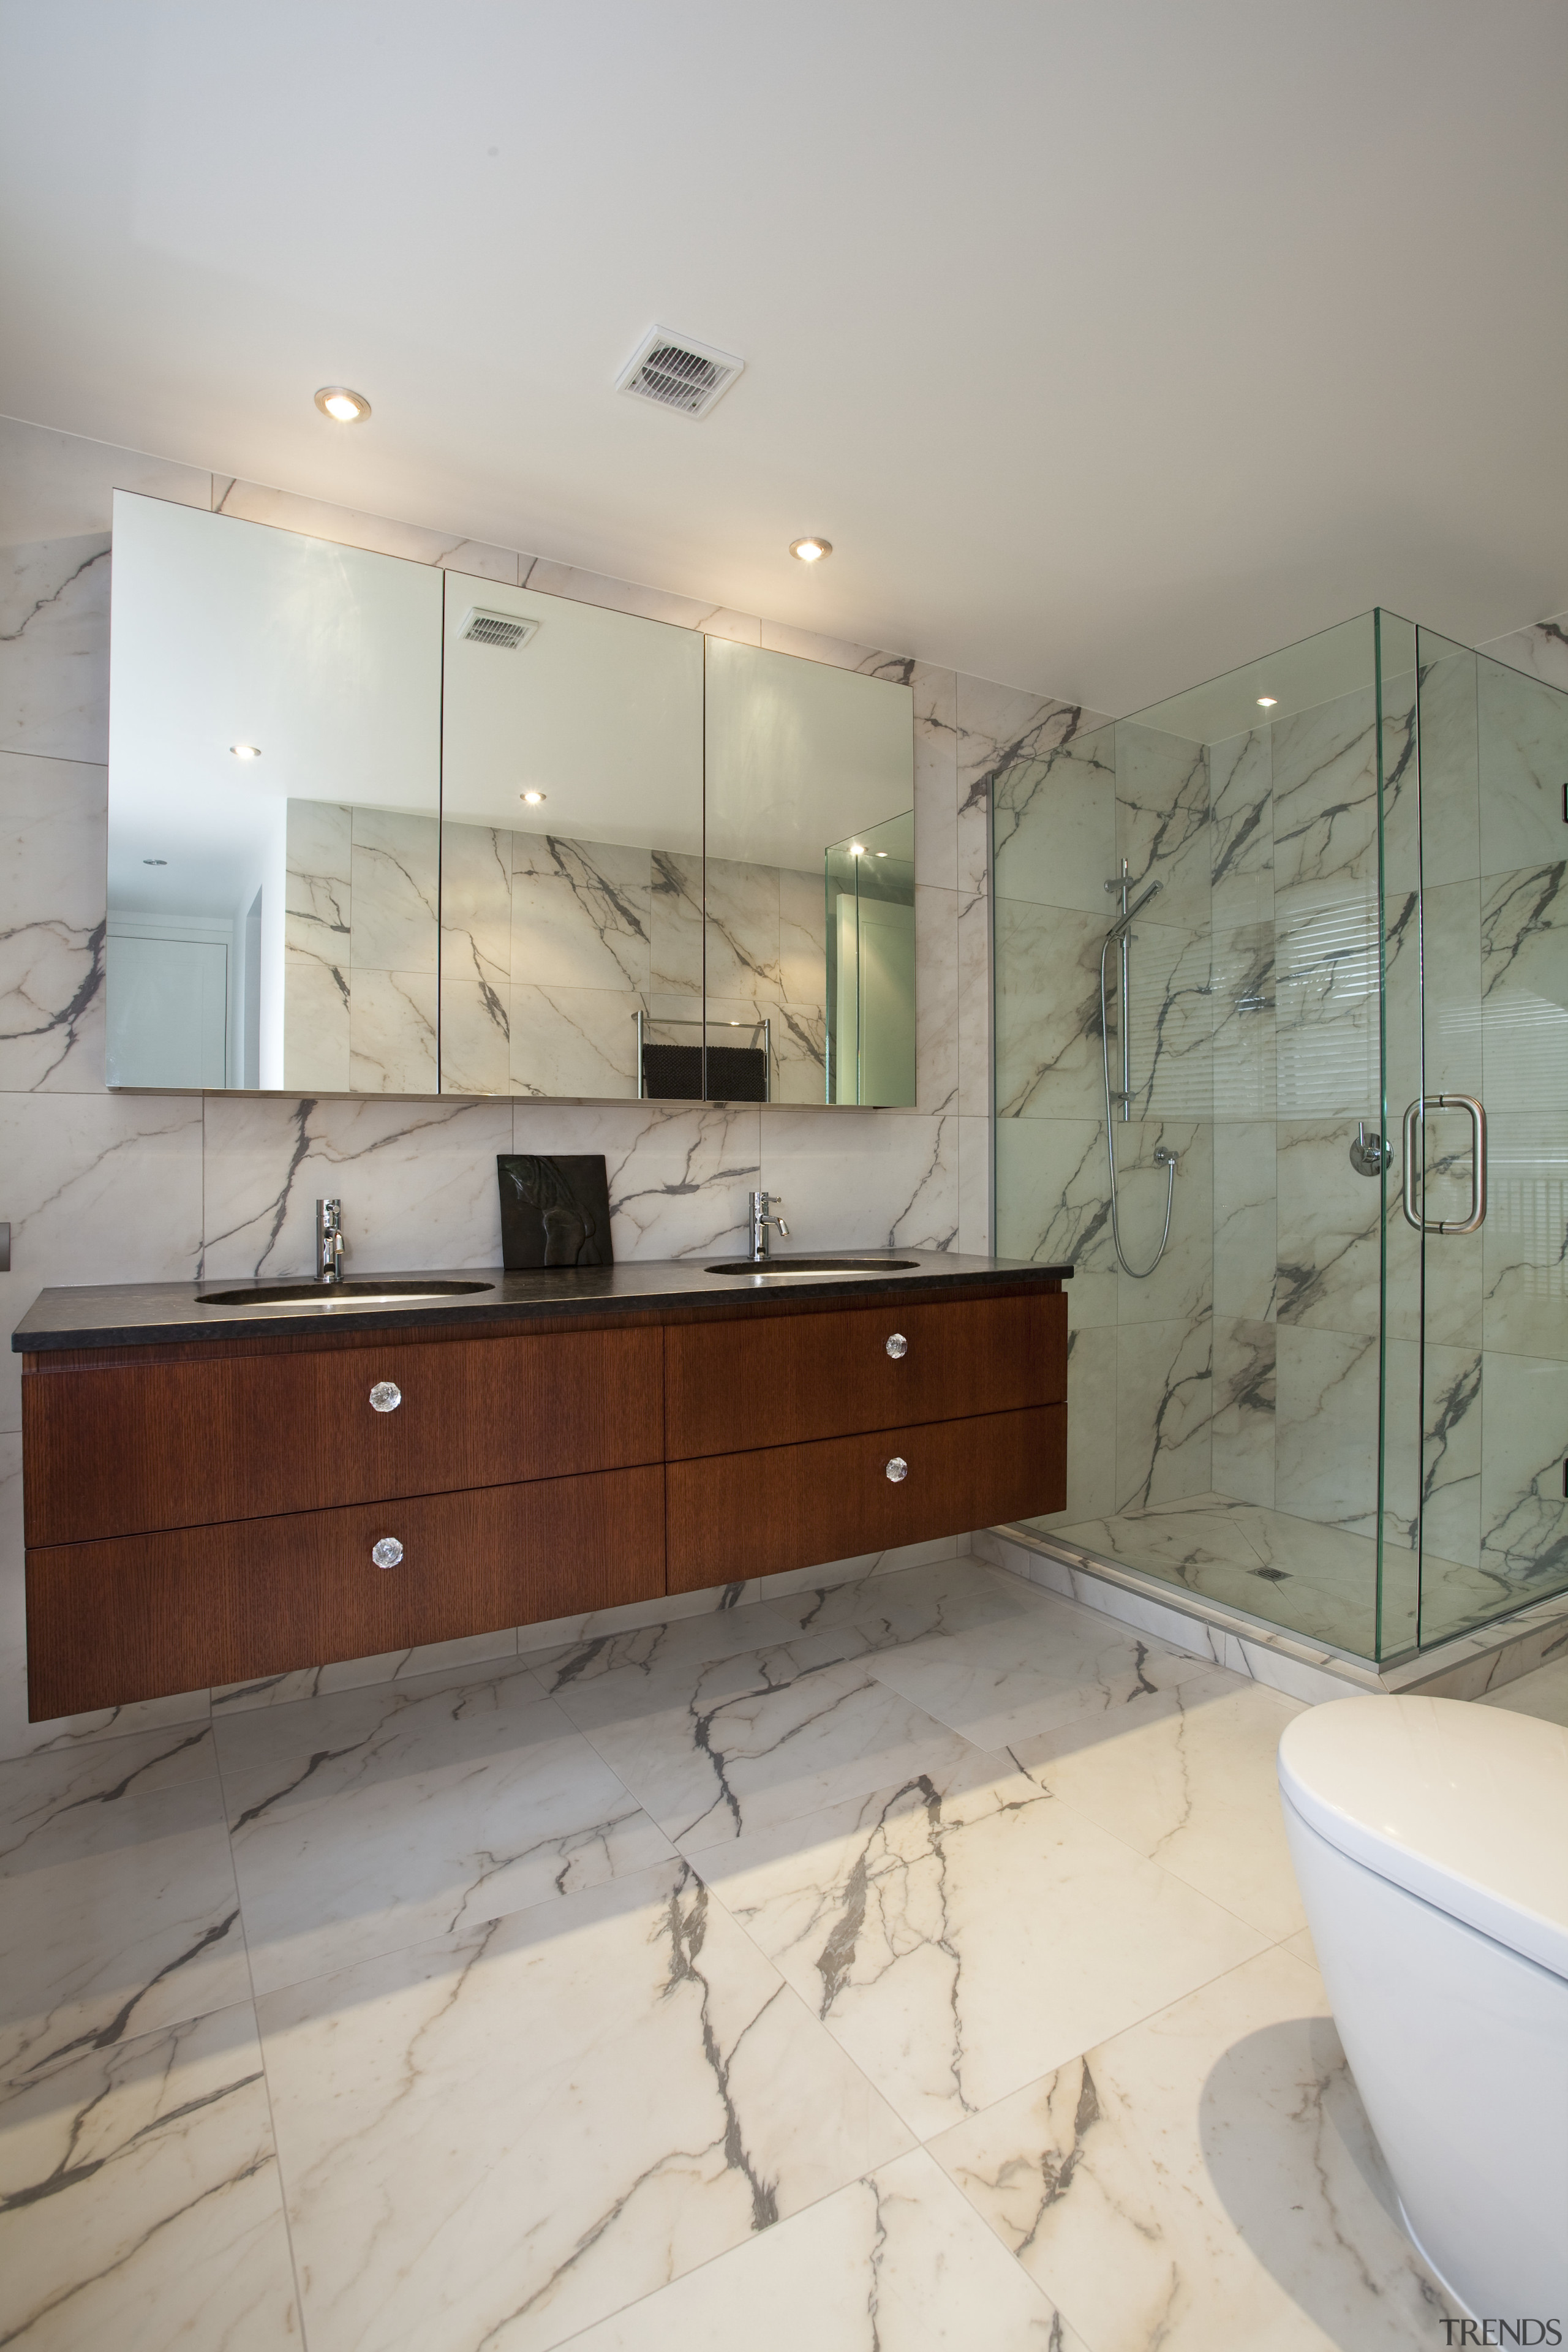 View of bathroom with marble-patterened porcelain tiles and bathroom, bathroom accessory, bathroom cabinet, cabinetry, ceiling, countertop, estate, floor, flooring, home, interior design, property, room, sink, tile, wall, gray